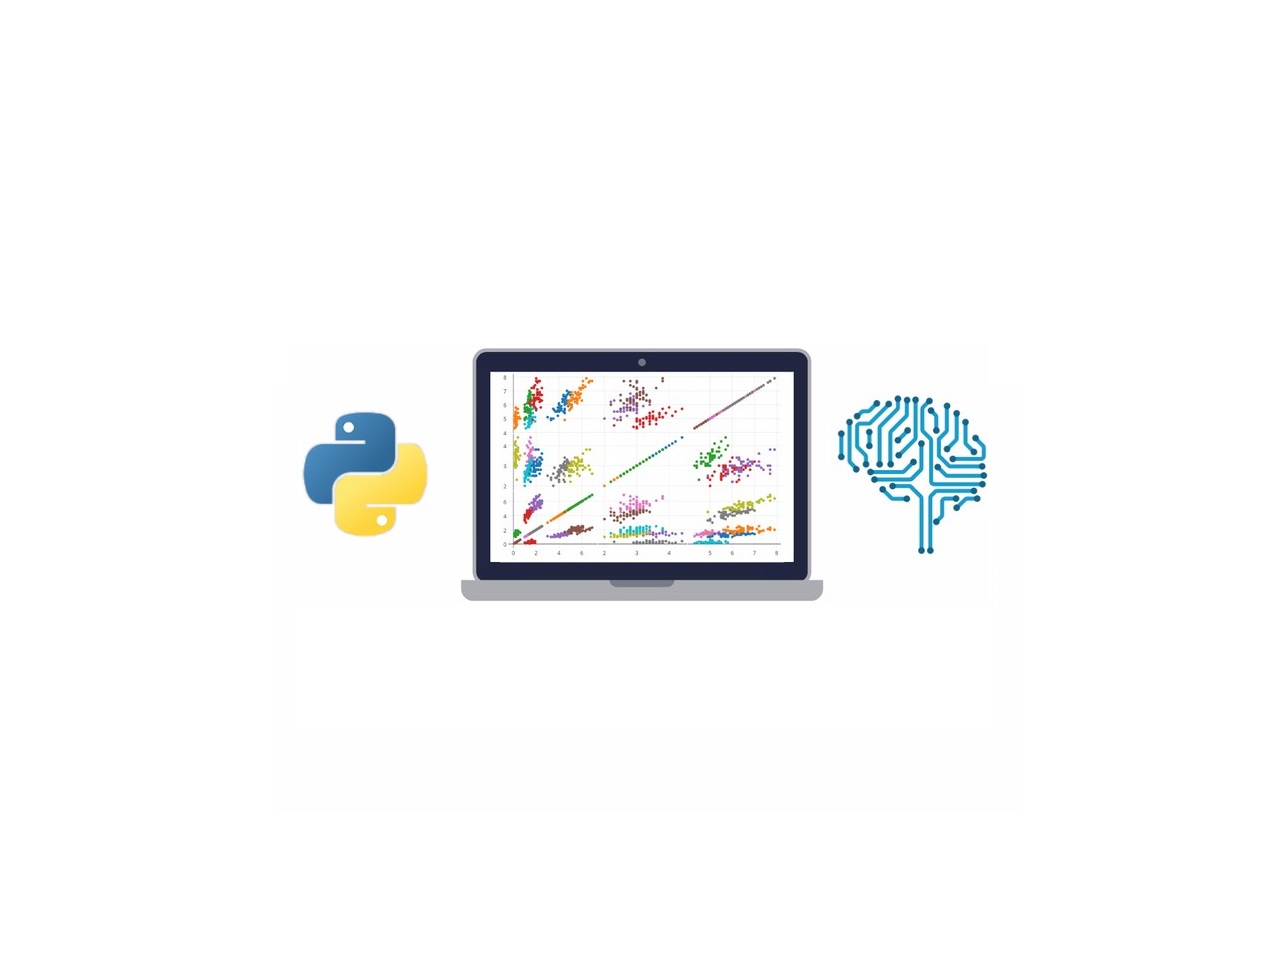 Python and Machine Learning